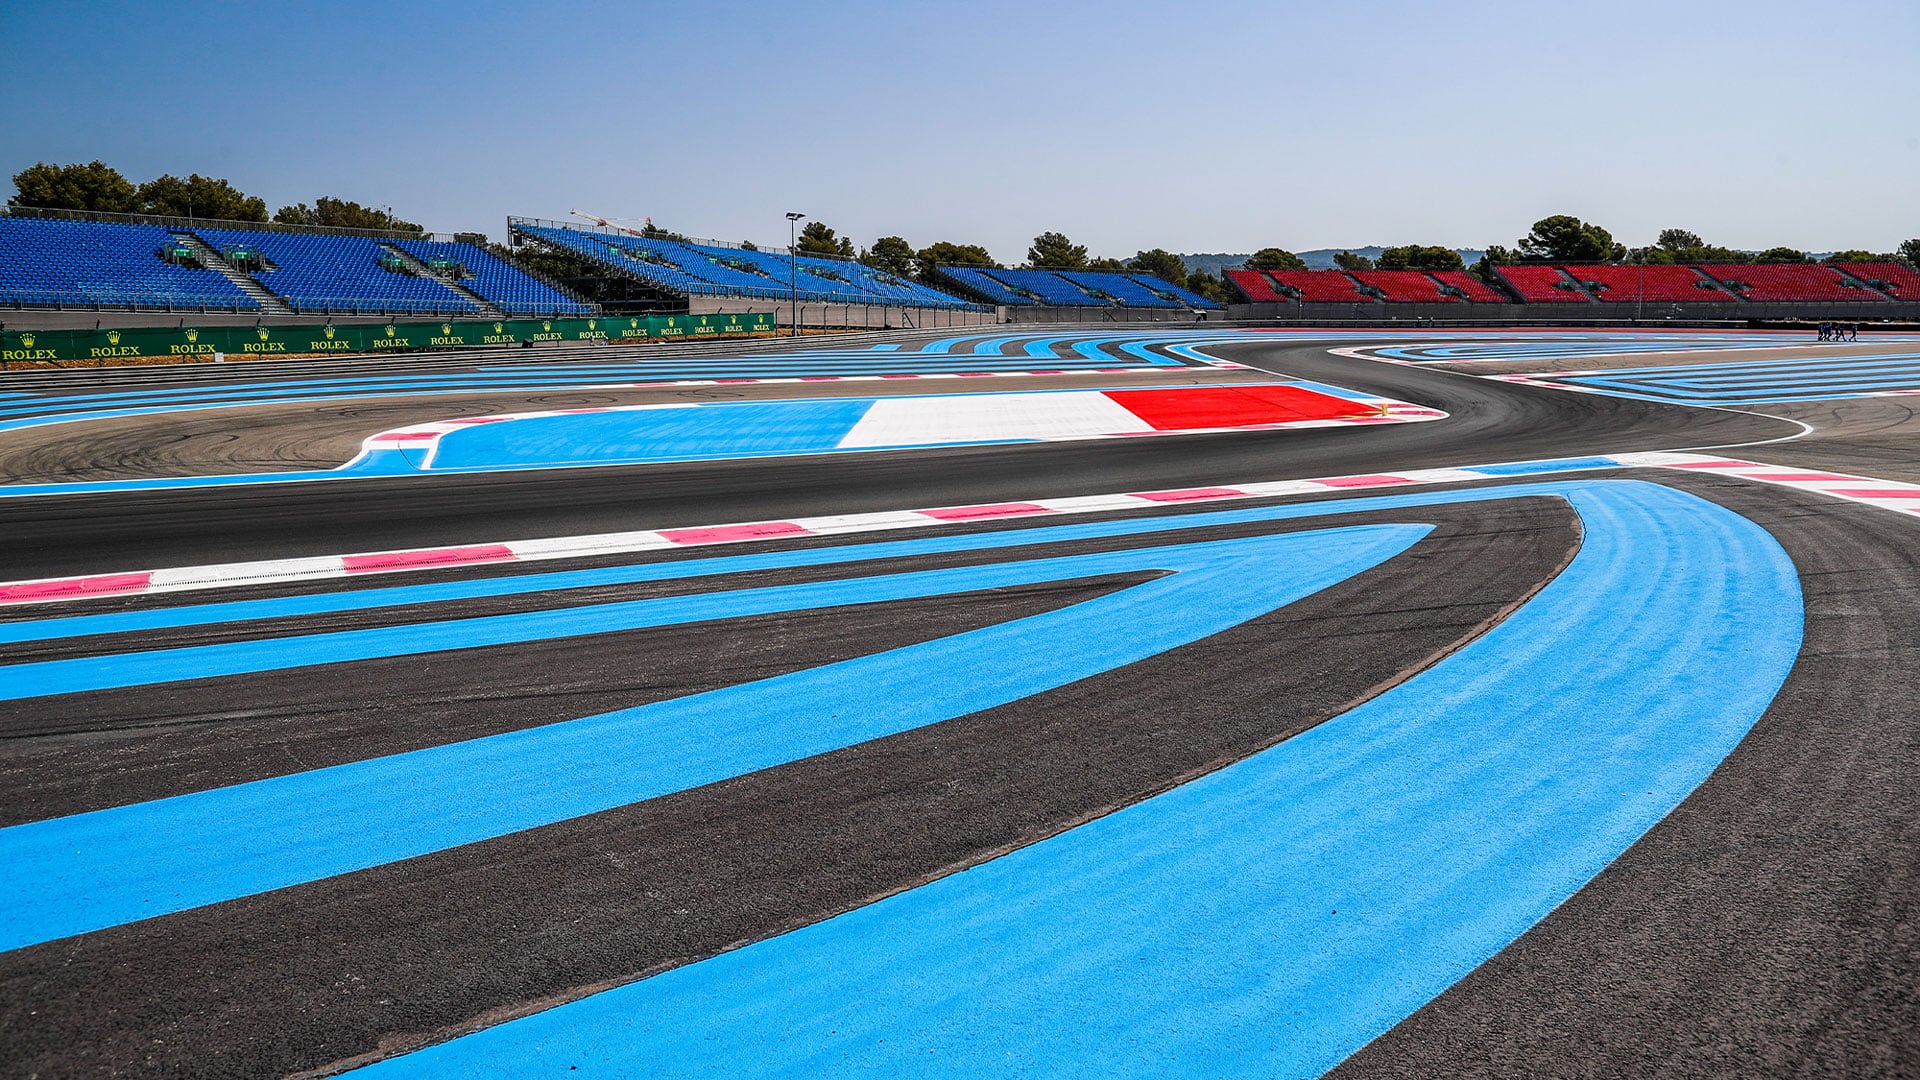 How to watch the F1 2022 French GP start time, TV schedule and live streams